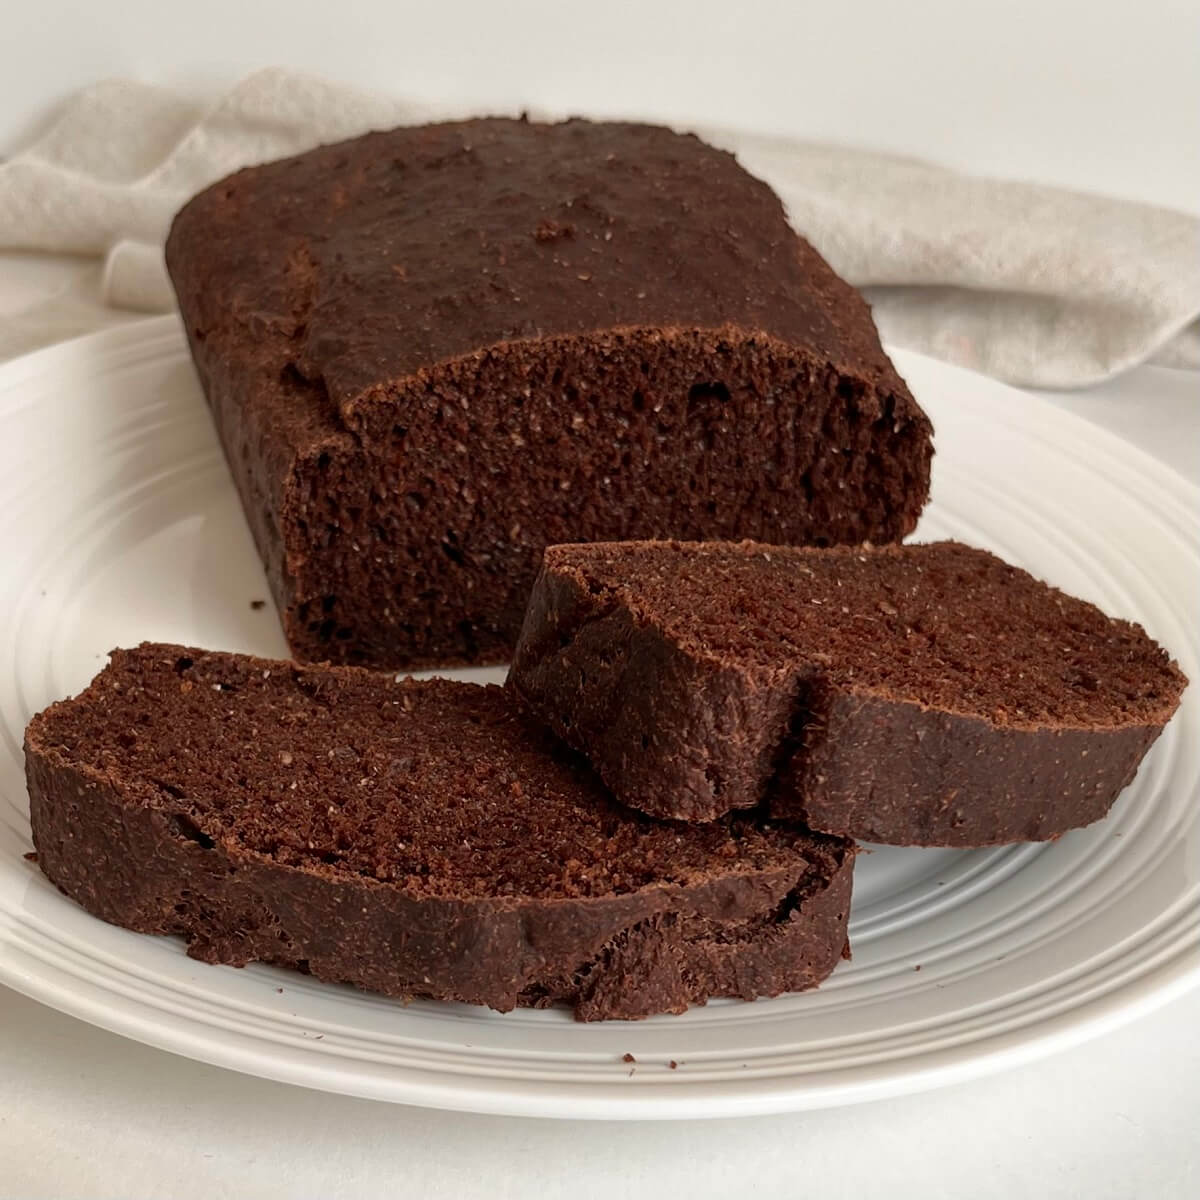 A loaf of no knead chocolate bread with two thick slices cut.